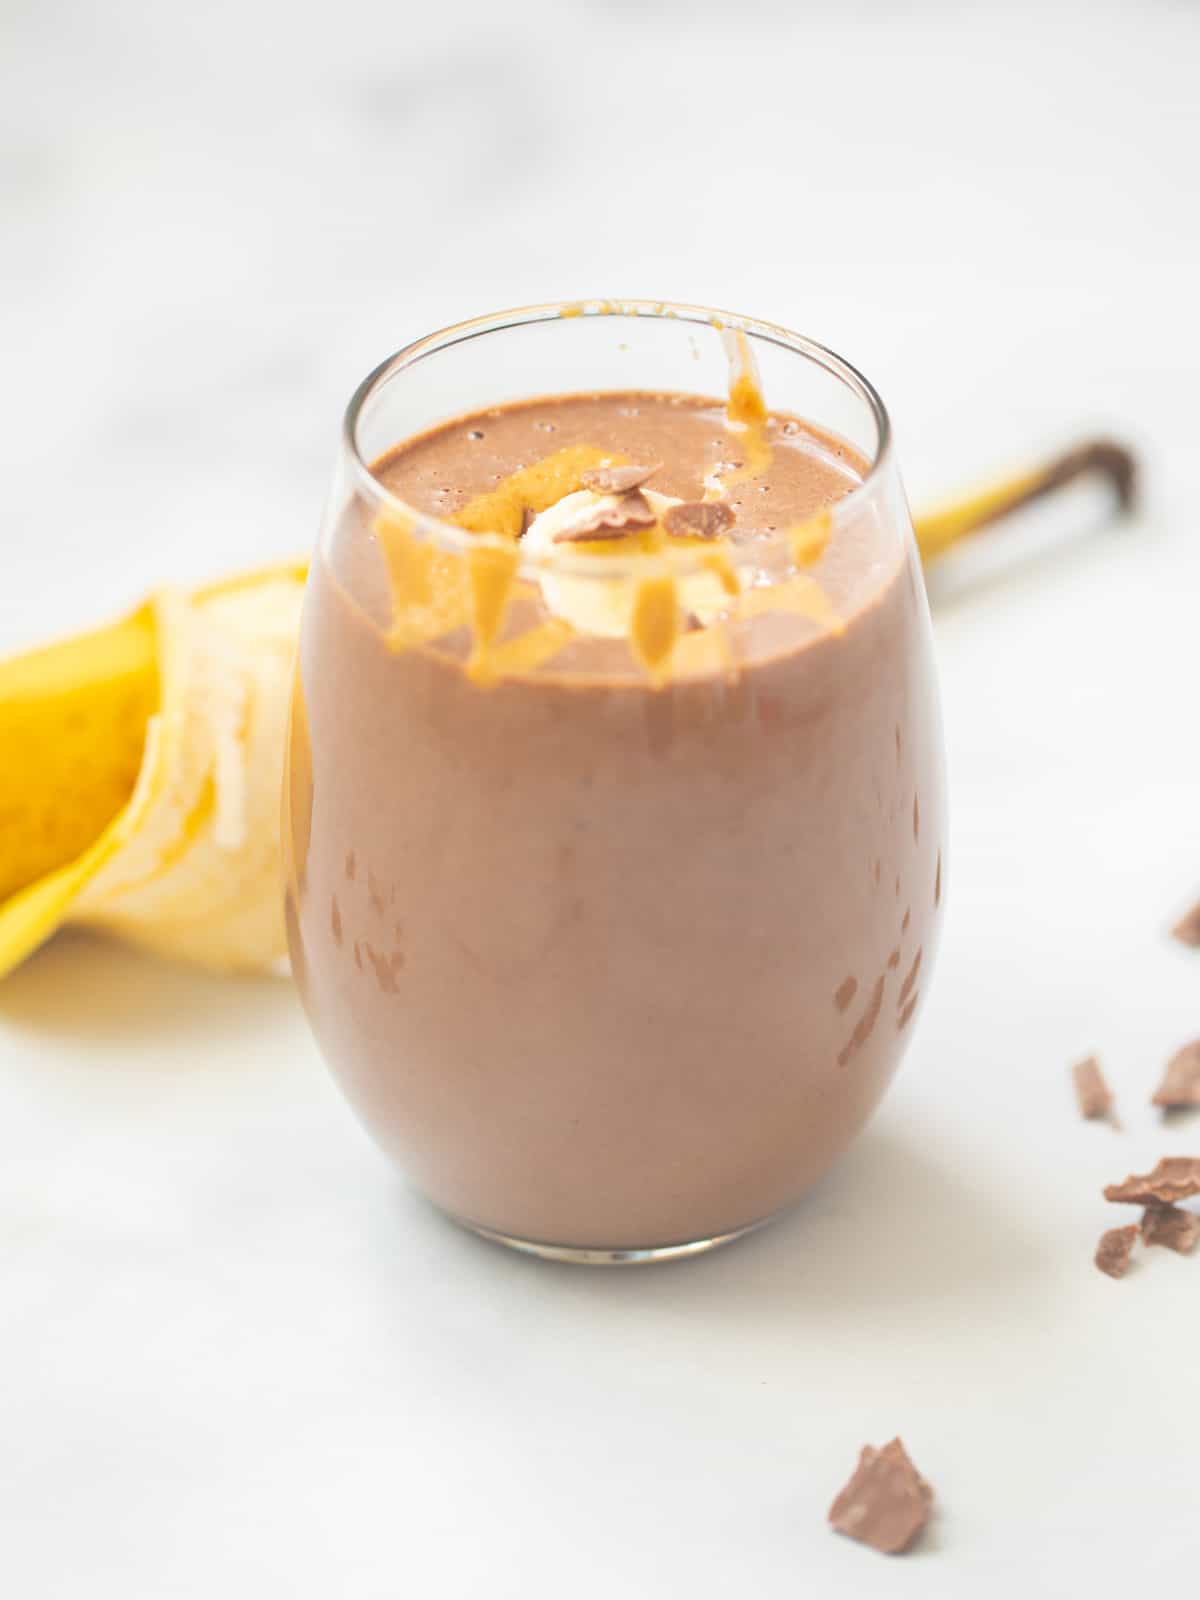 Peanut Butter Chocolate smoothie in clear glass topped with sliced banana, drizzle peanut butter, and chocolate.